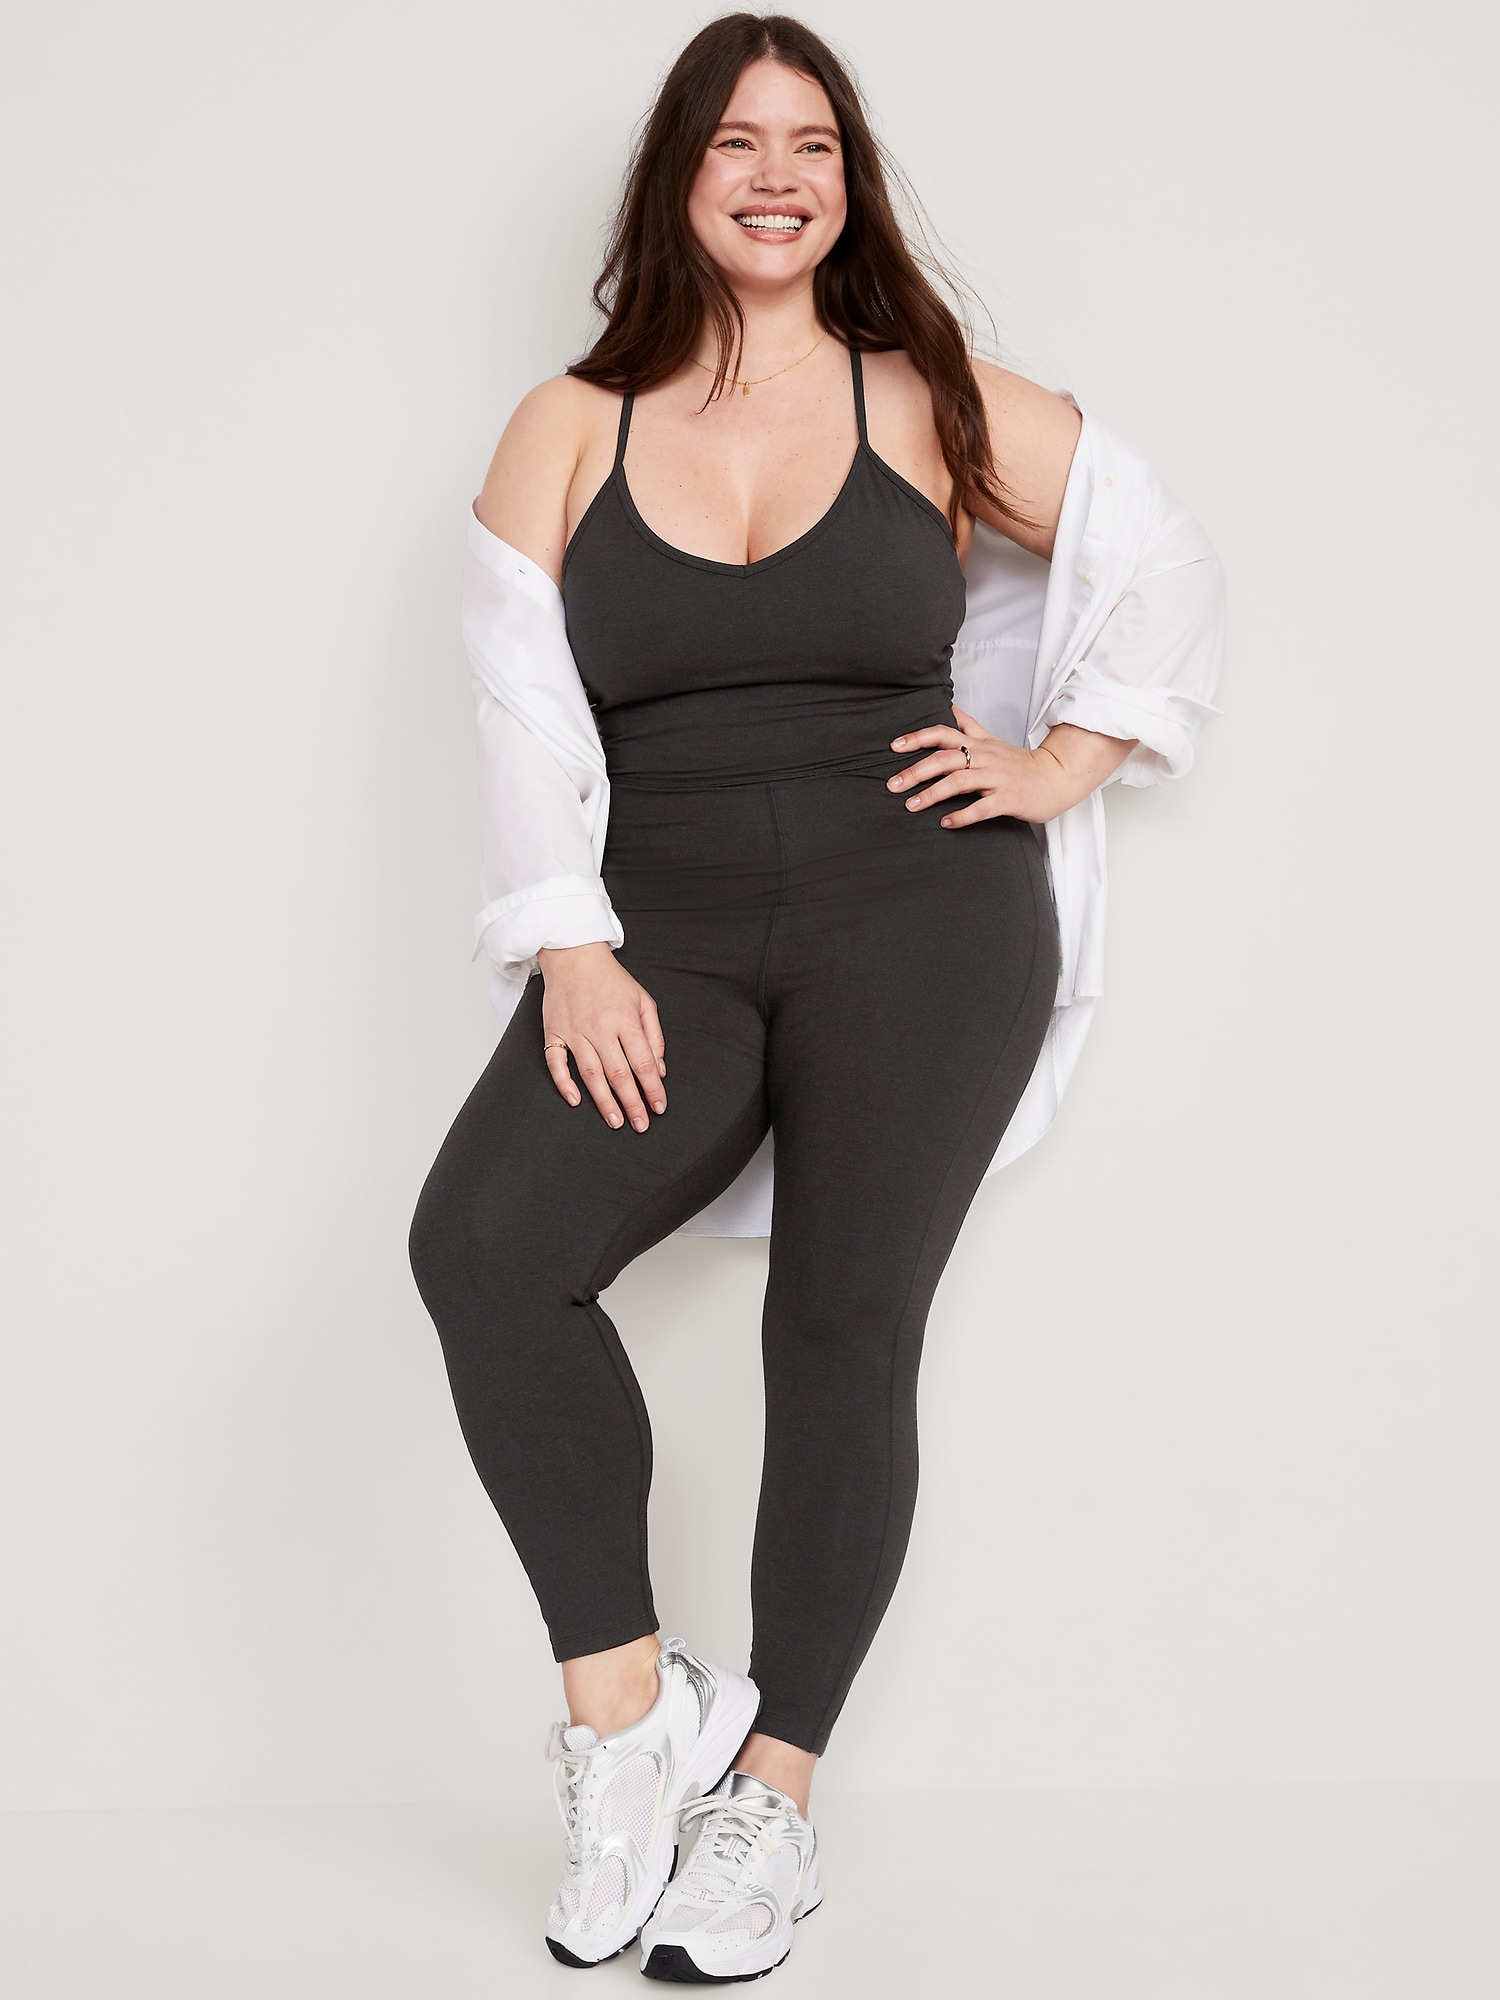 Old Navy PowerChill Performance Bodysuit I Editor Review